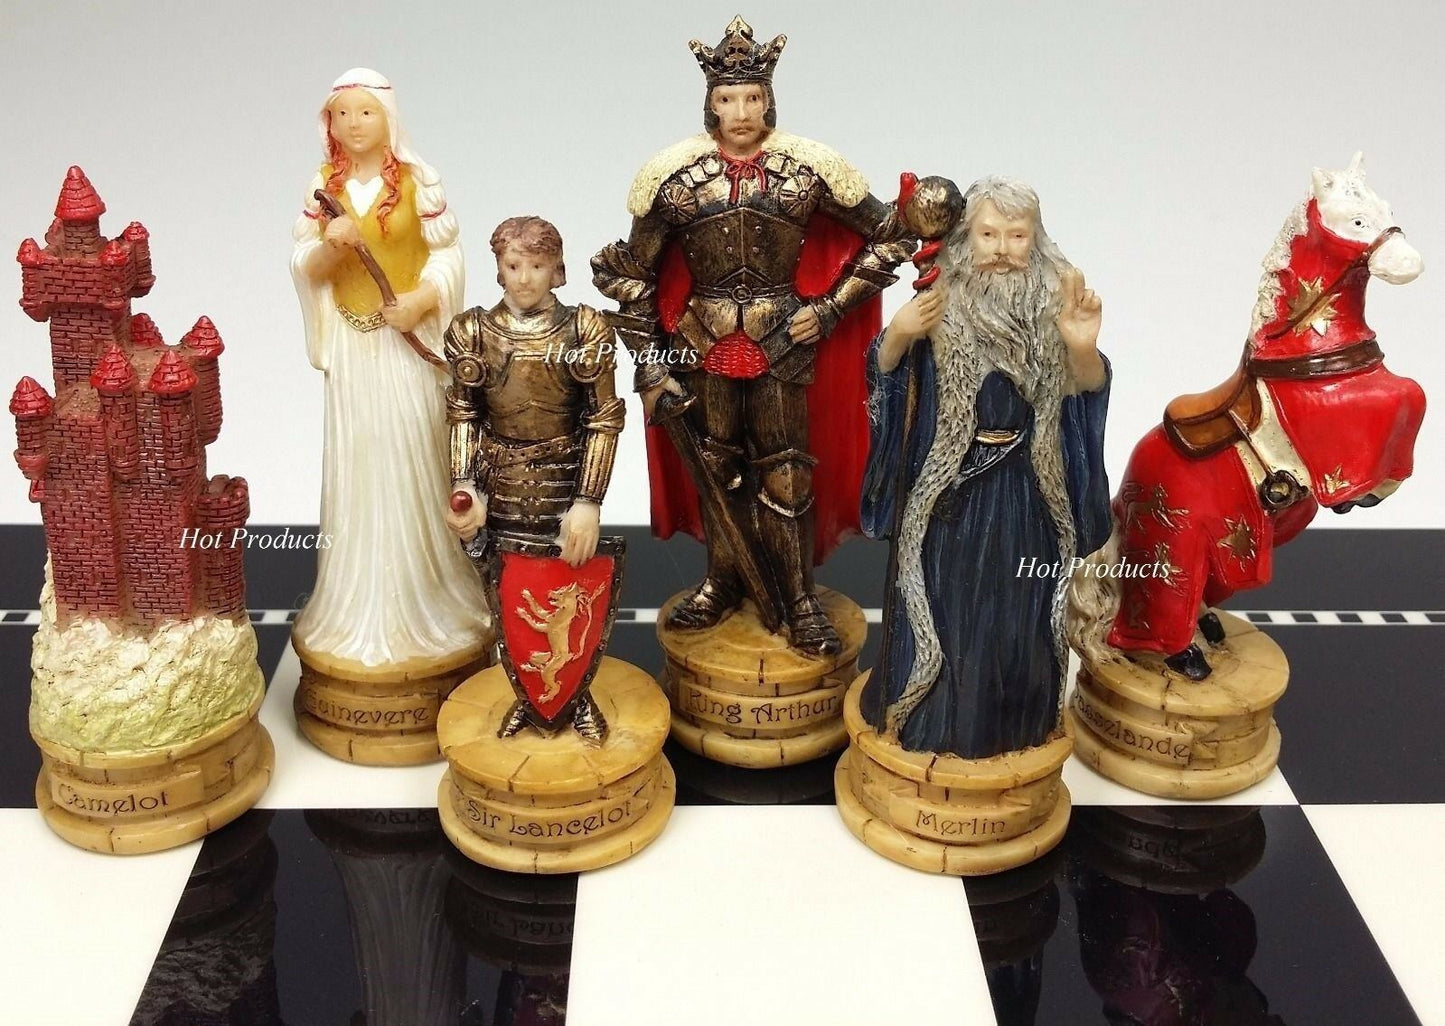 Medieval Times King Arthur CAMELOT Knight Chess Set W/ Black & White Gloss Board